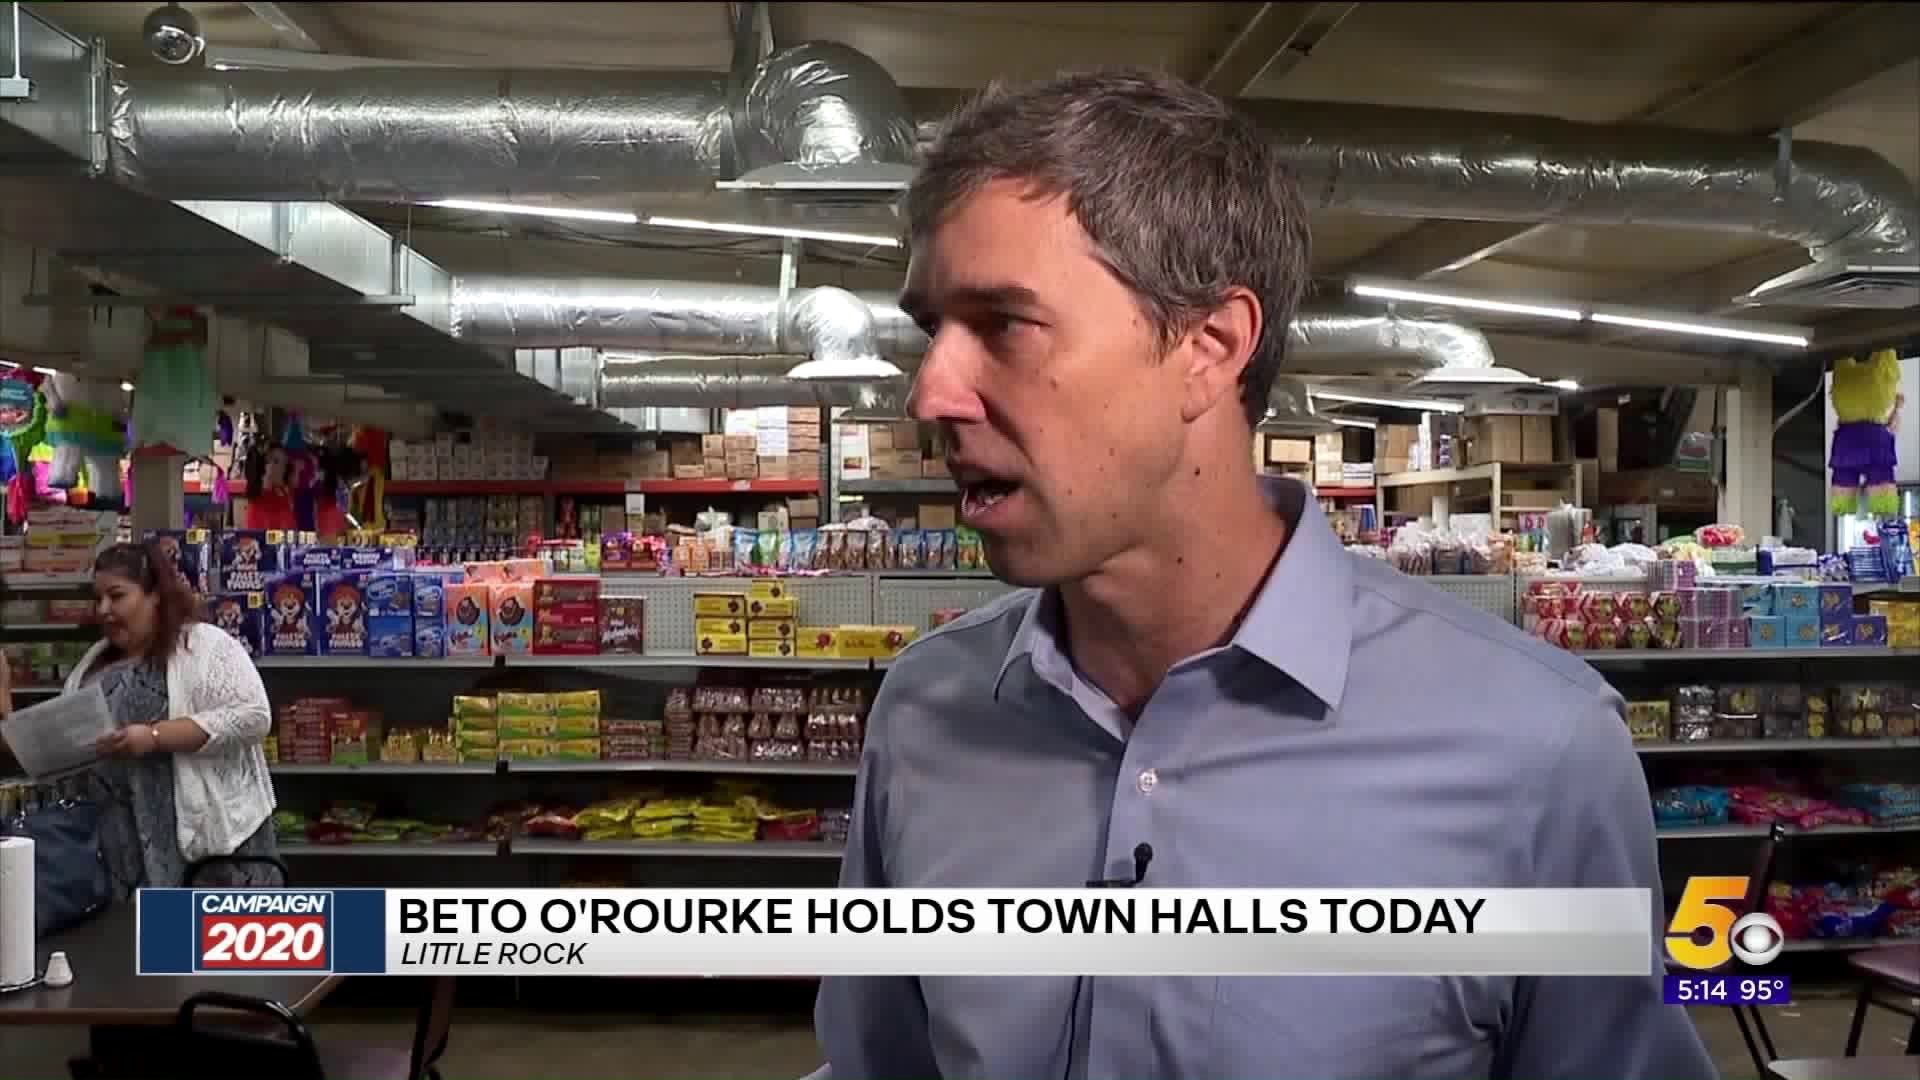 Moms Demand Action To Hold Gun Reform Rally In Little Rock, Beto O`Rourke To Attend